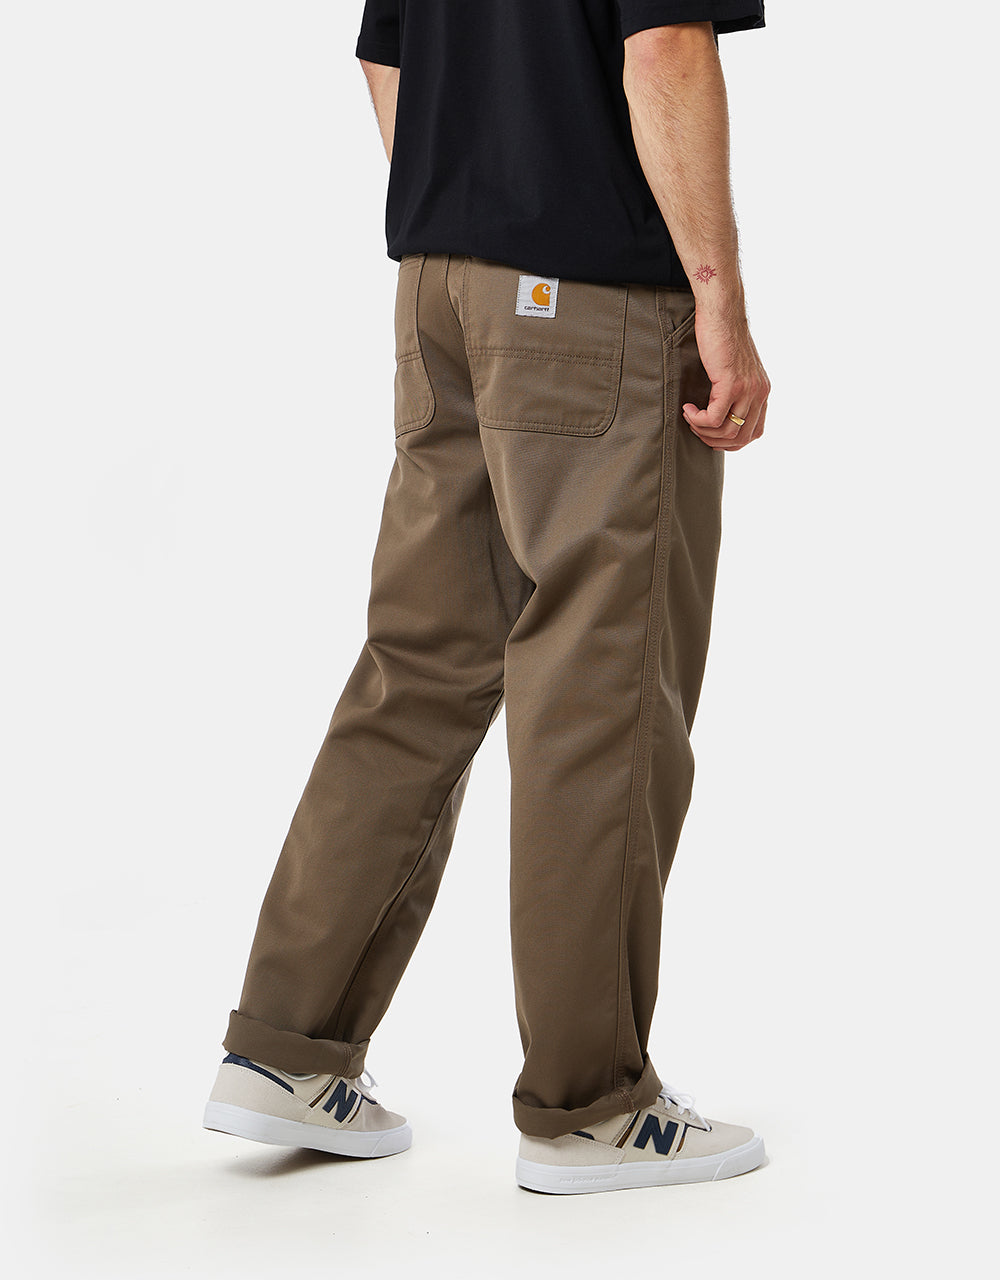 Trousers Carhartt Navy size 32 UK - US in Cotton - 40066653